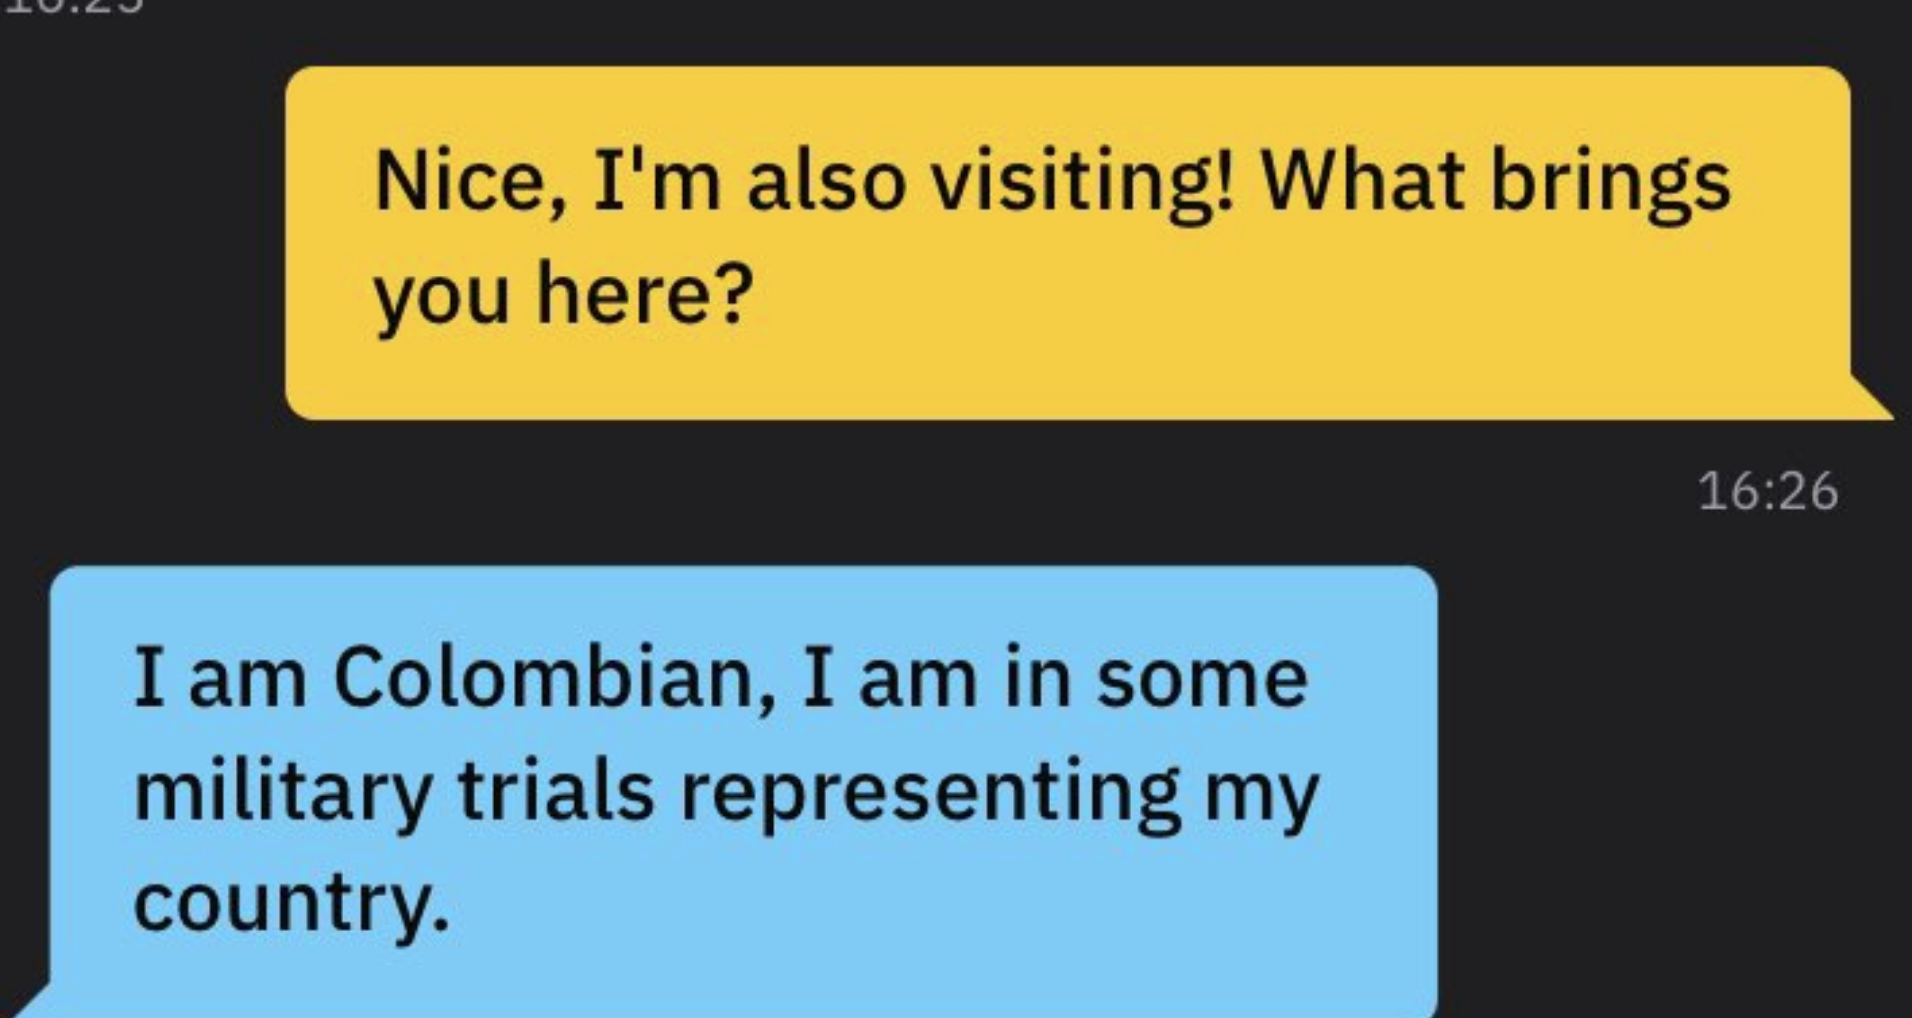 &quot;I am Colombian, I am in some military trials representing my country.&quot;